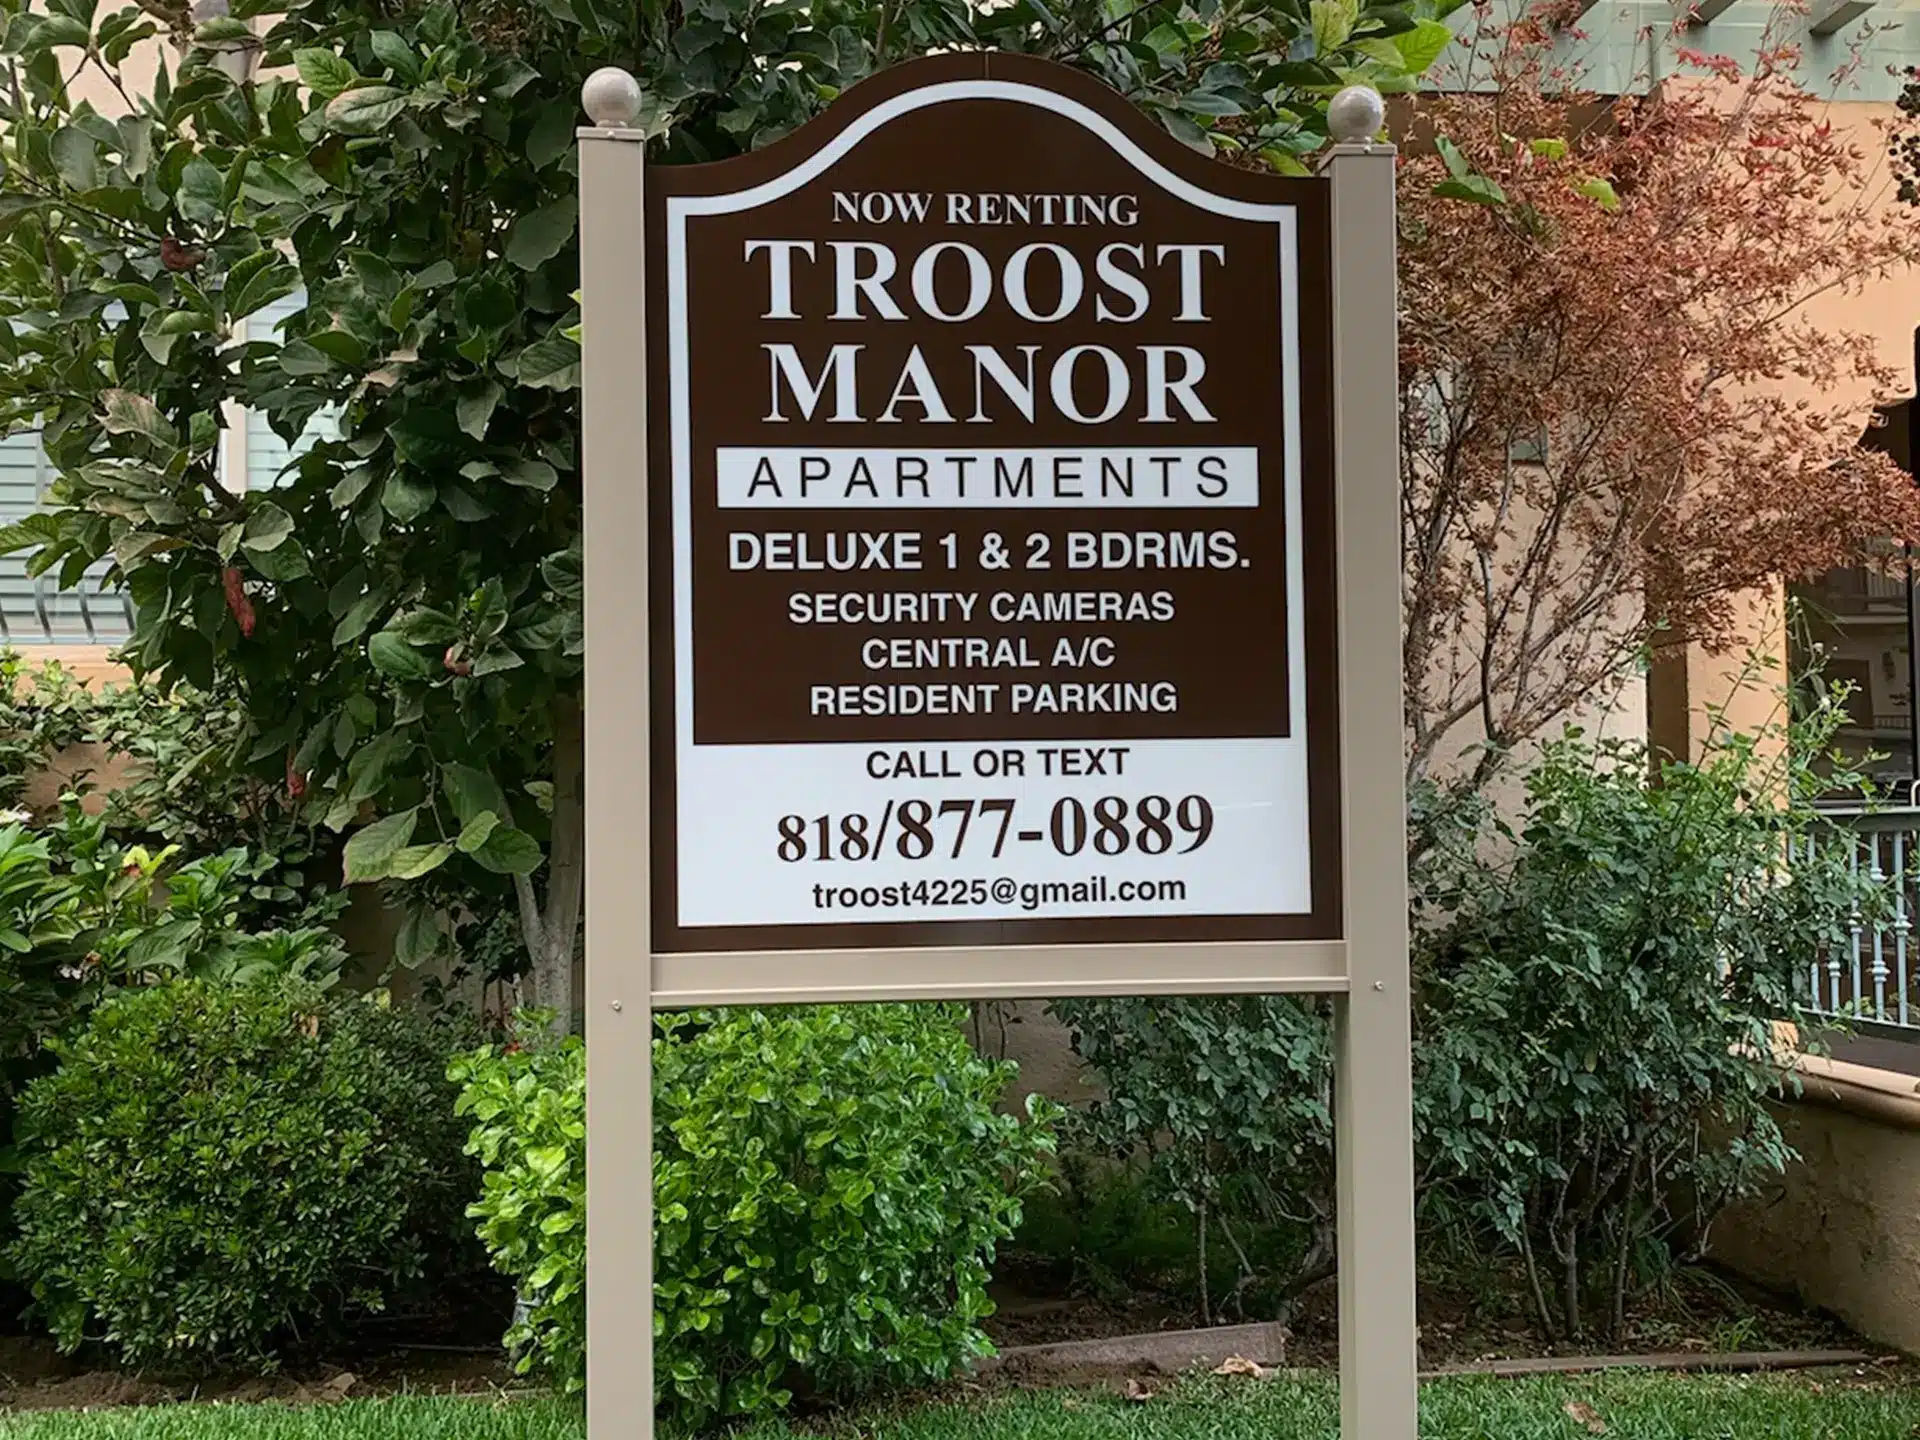 Troost Manor Apartments